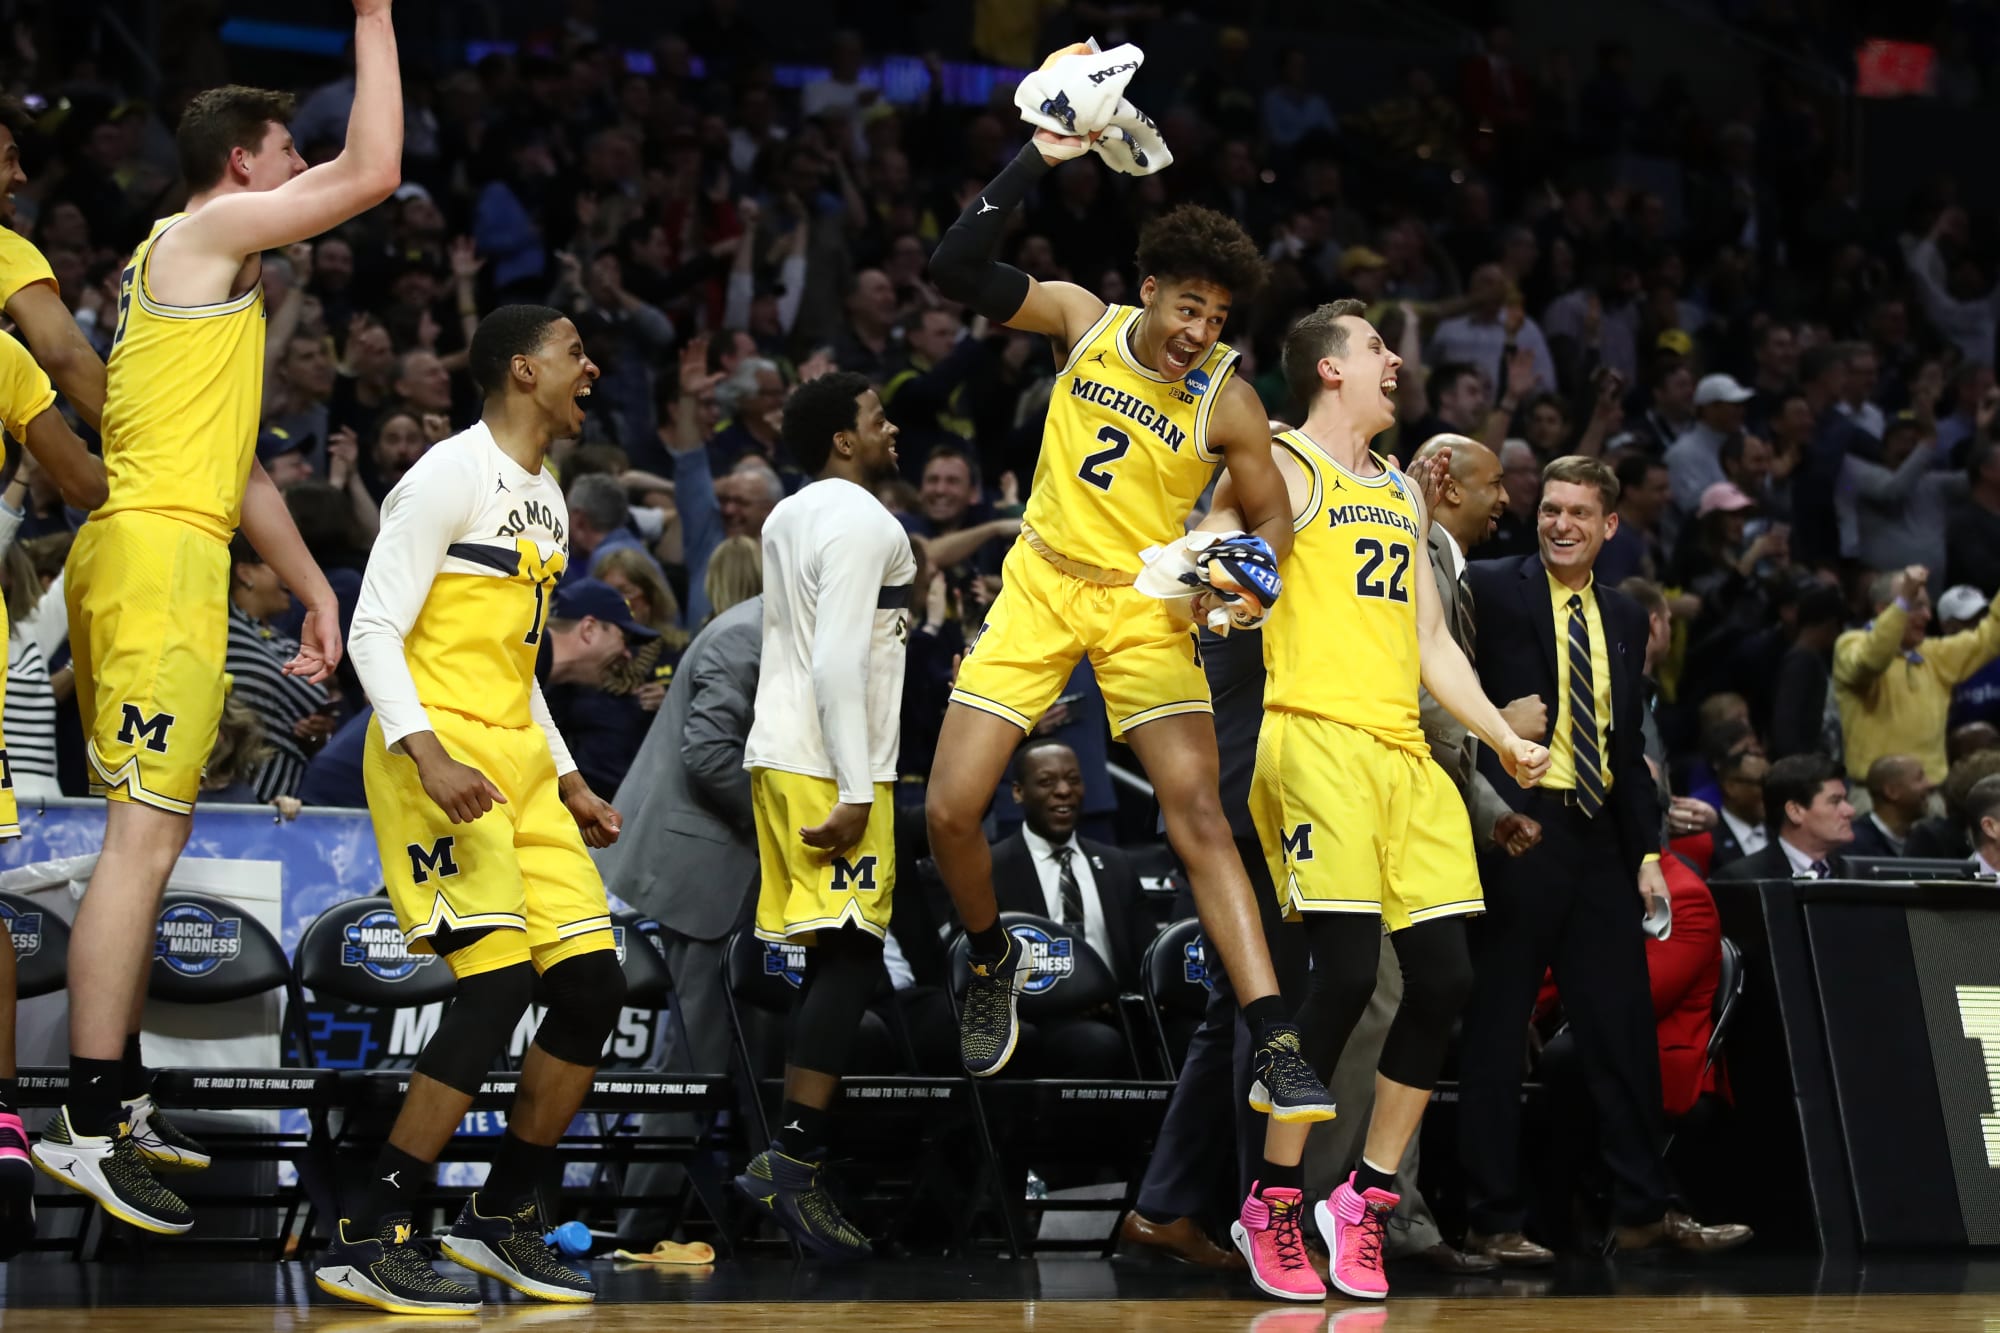 Michigan vs. Florida State: NCAA Tournament game preview, schedule and